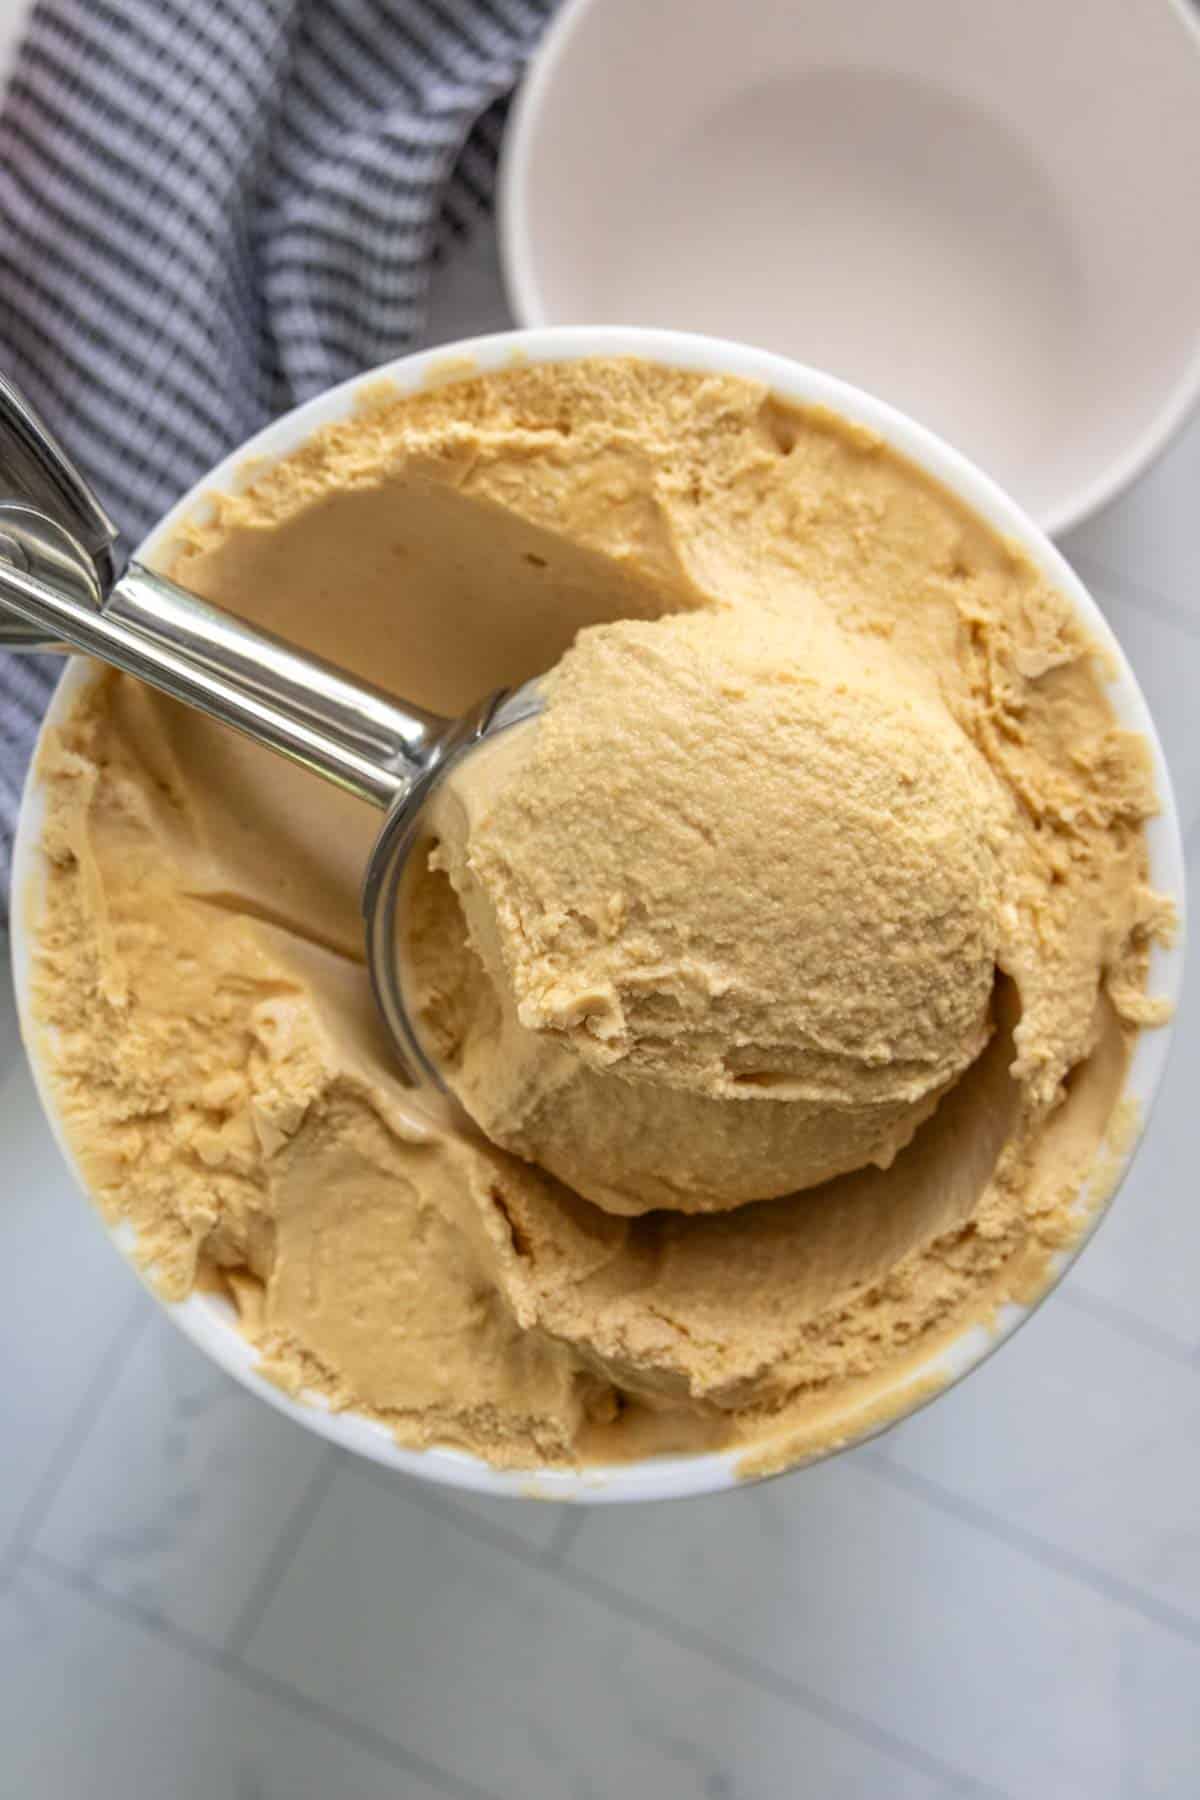 A metal scoop is inserted into a container of creamy, light brown ice cream. A white bowl and a striped cloth are partially visible in the background.